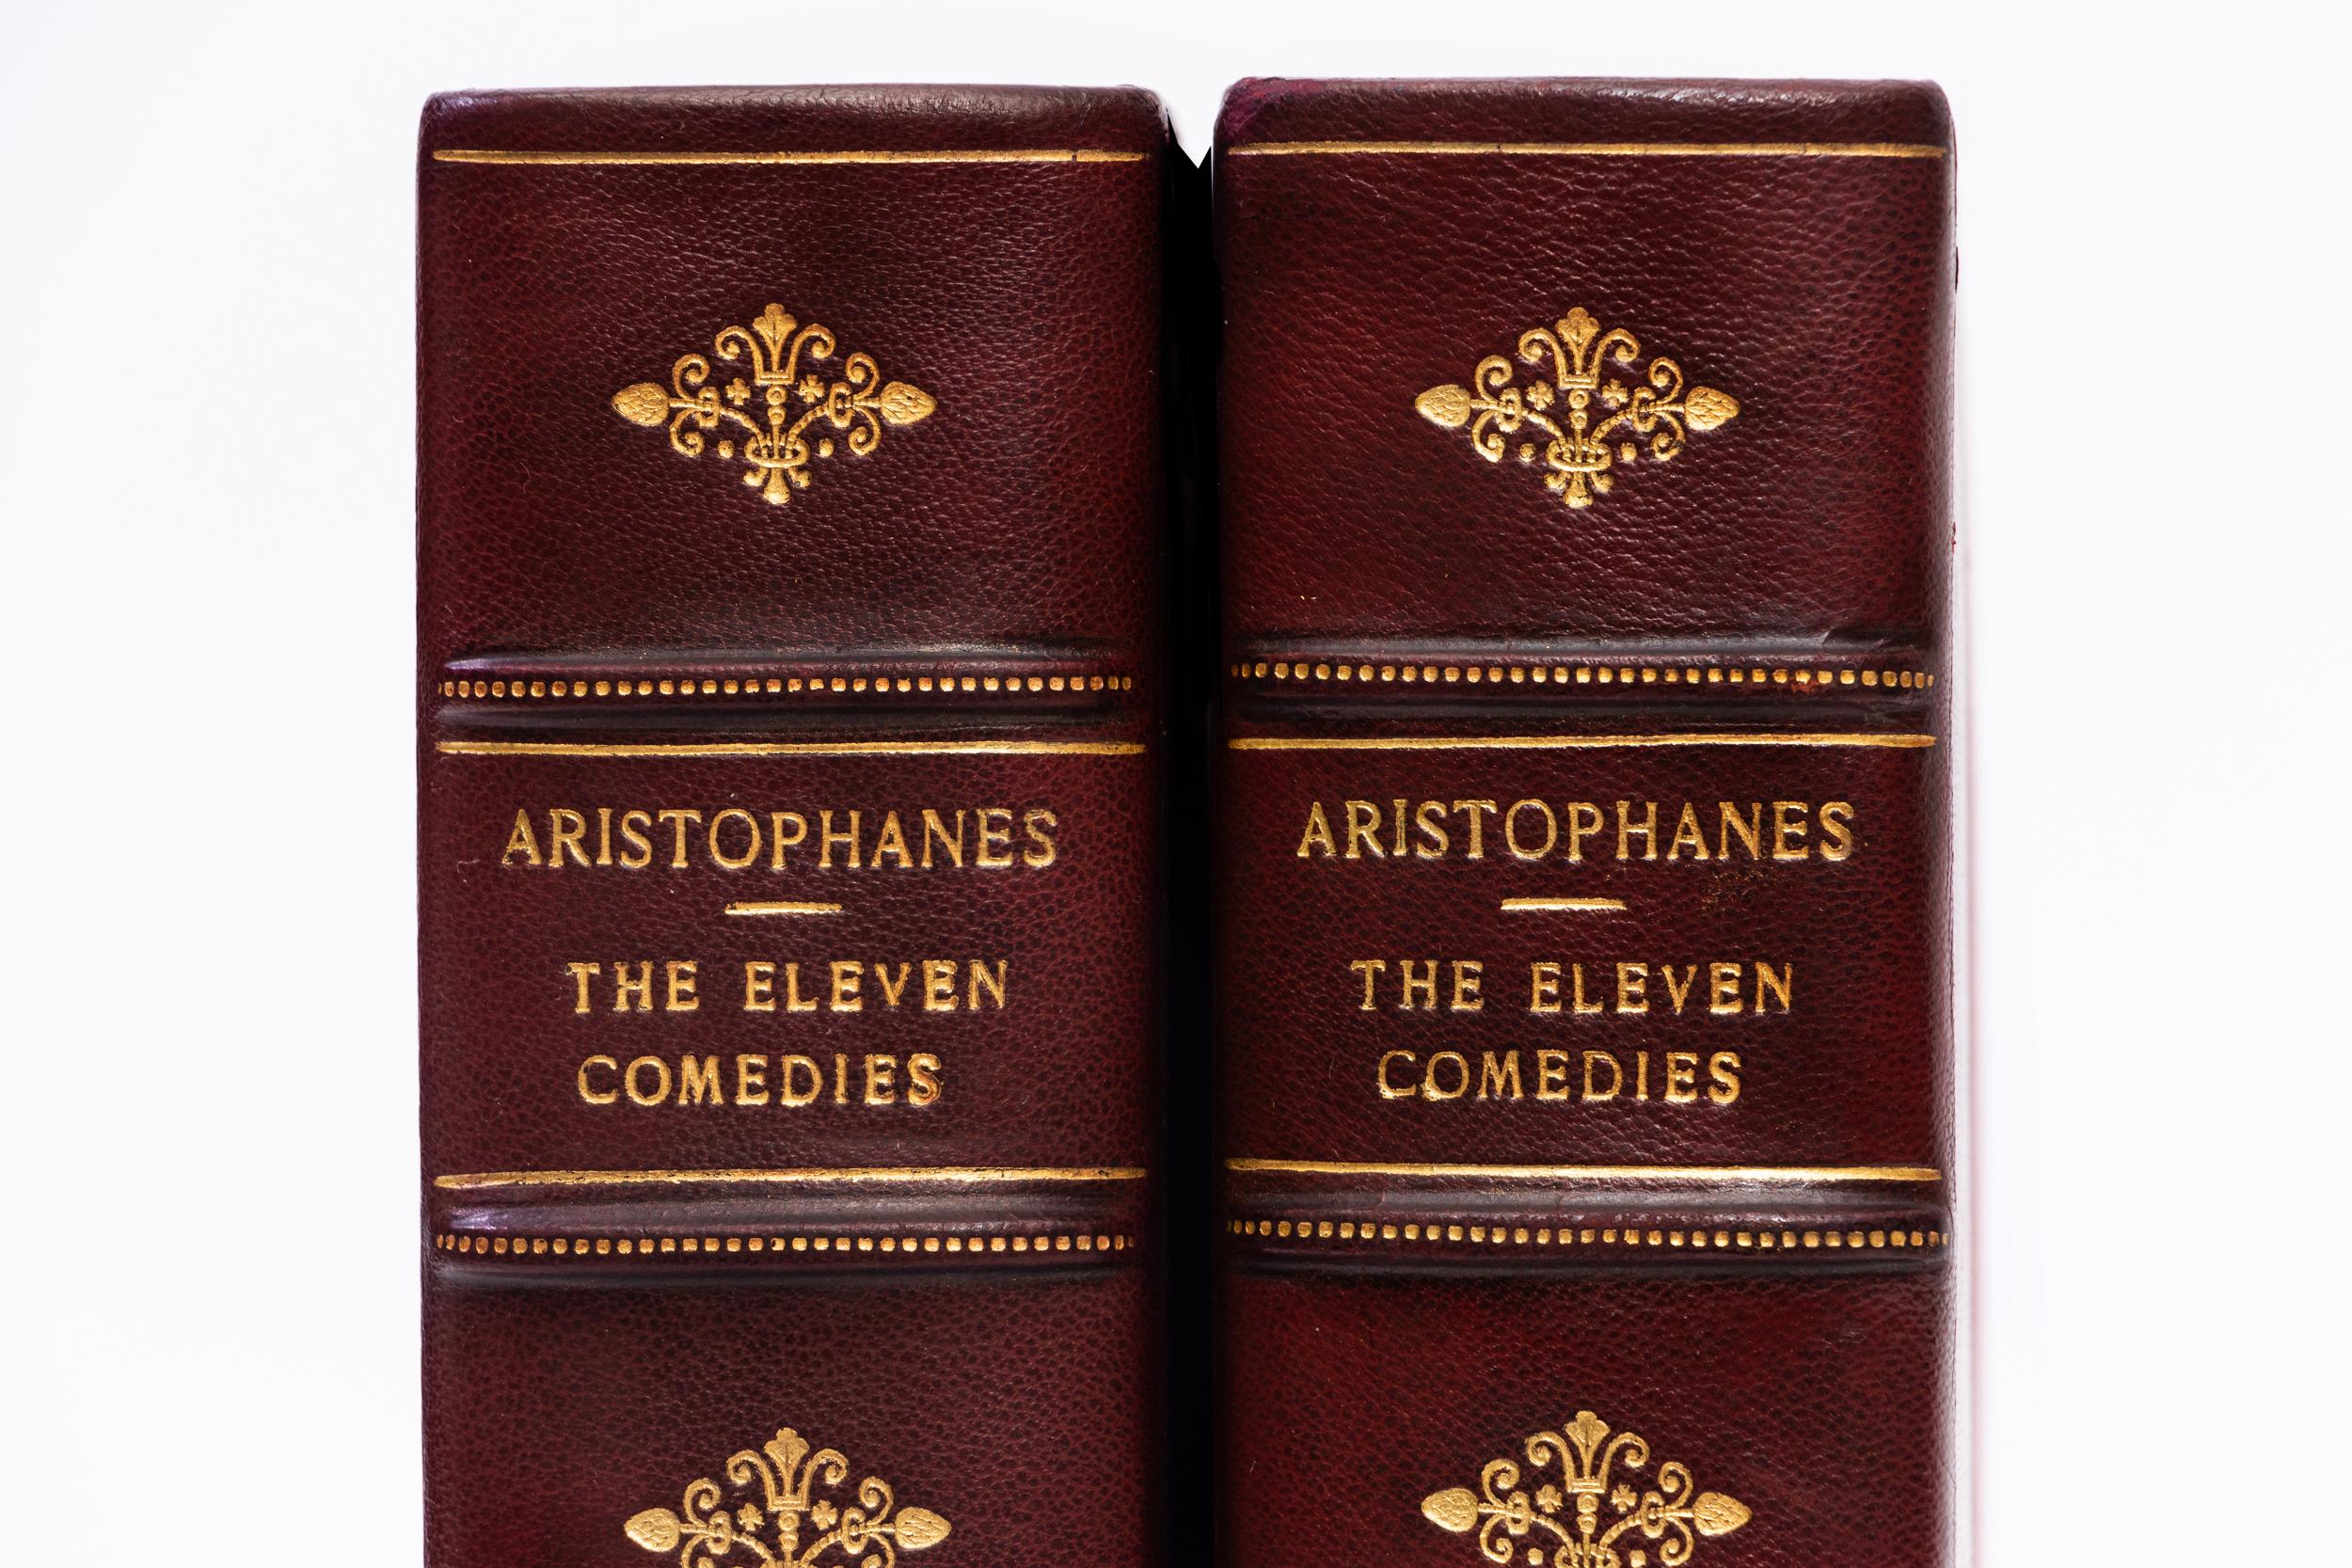 2 Volumes. Aristophanes, The Eleven Comedies. Bound in 3/4 red morocco. Linen boards. Raised bands. Decorative gilt emblems on spines. Top edges gilt. Decorative cork endpapers. This edition of the Eleven Comedies of Aristophanes is strictly limited